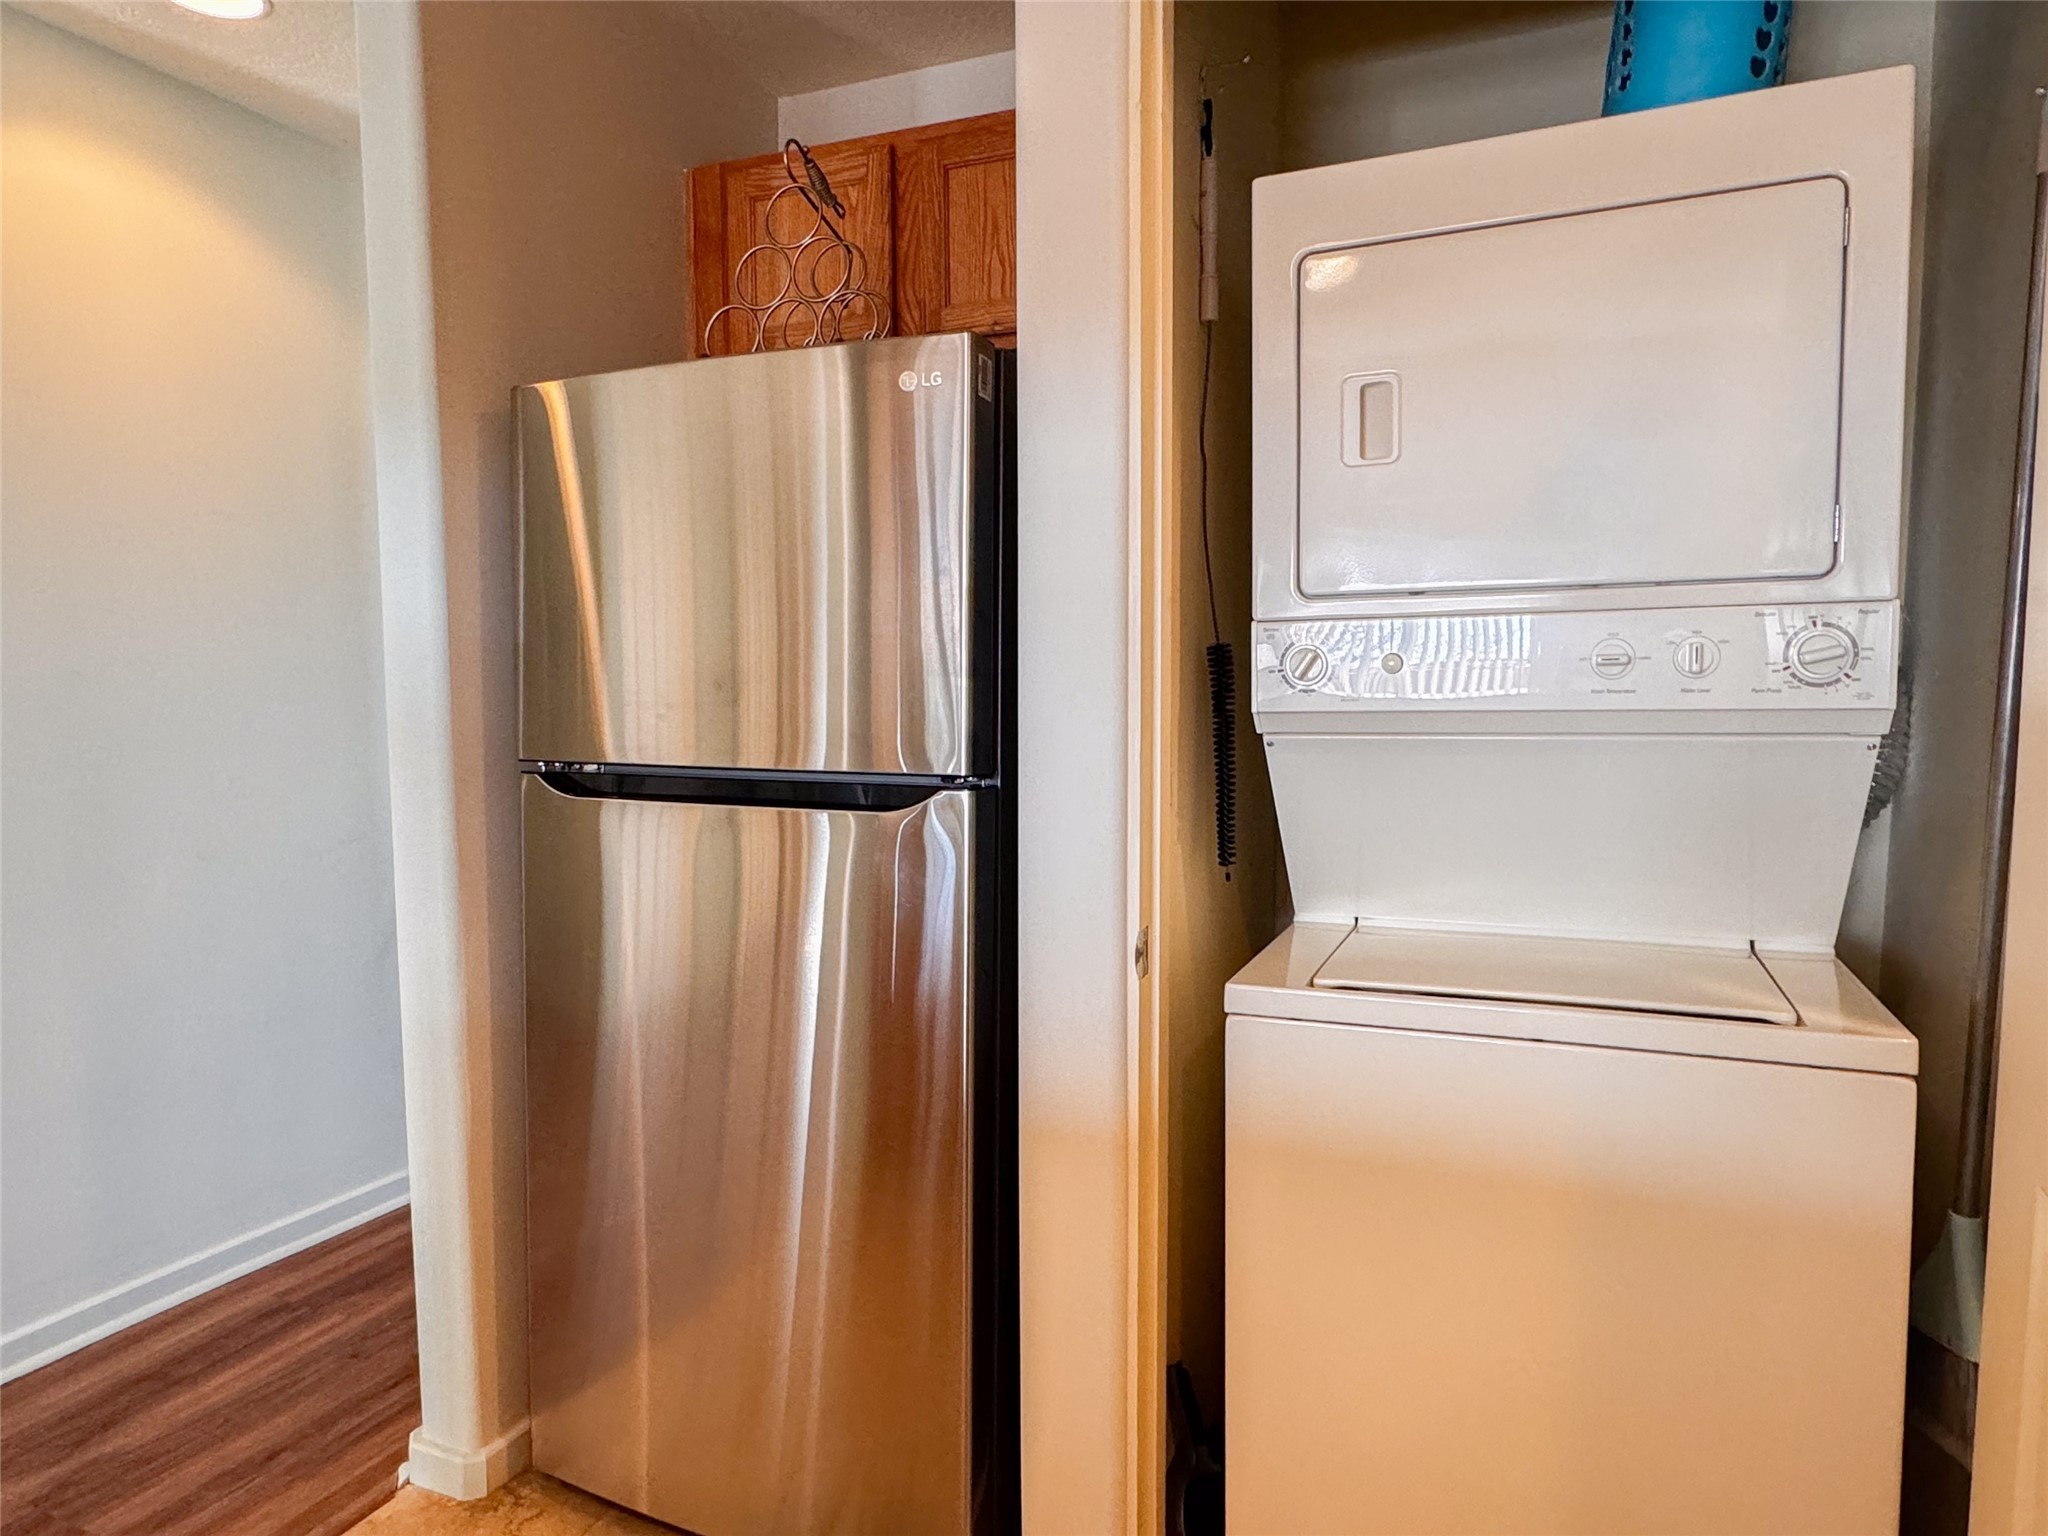 STAINLESS STEEL REFRIGERATOR NEXT TO THE LAUNDRY AREA